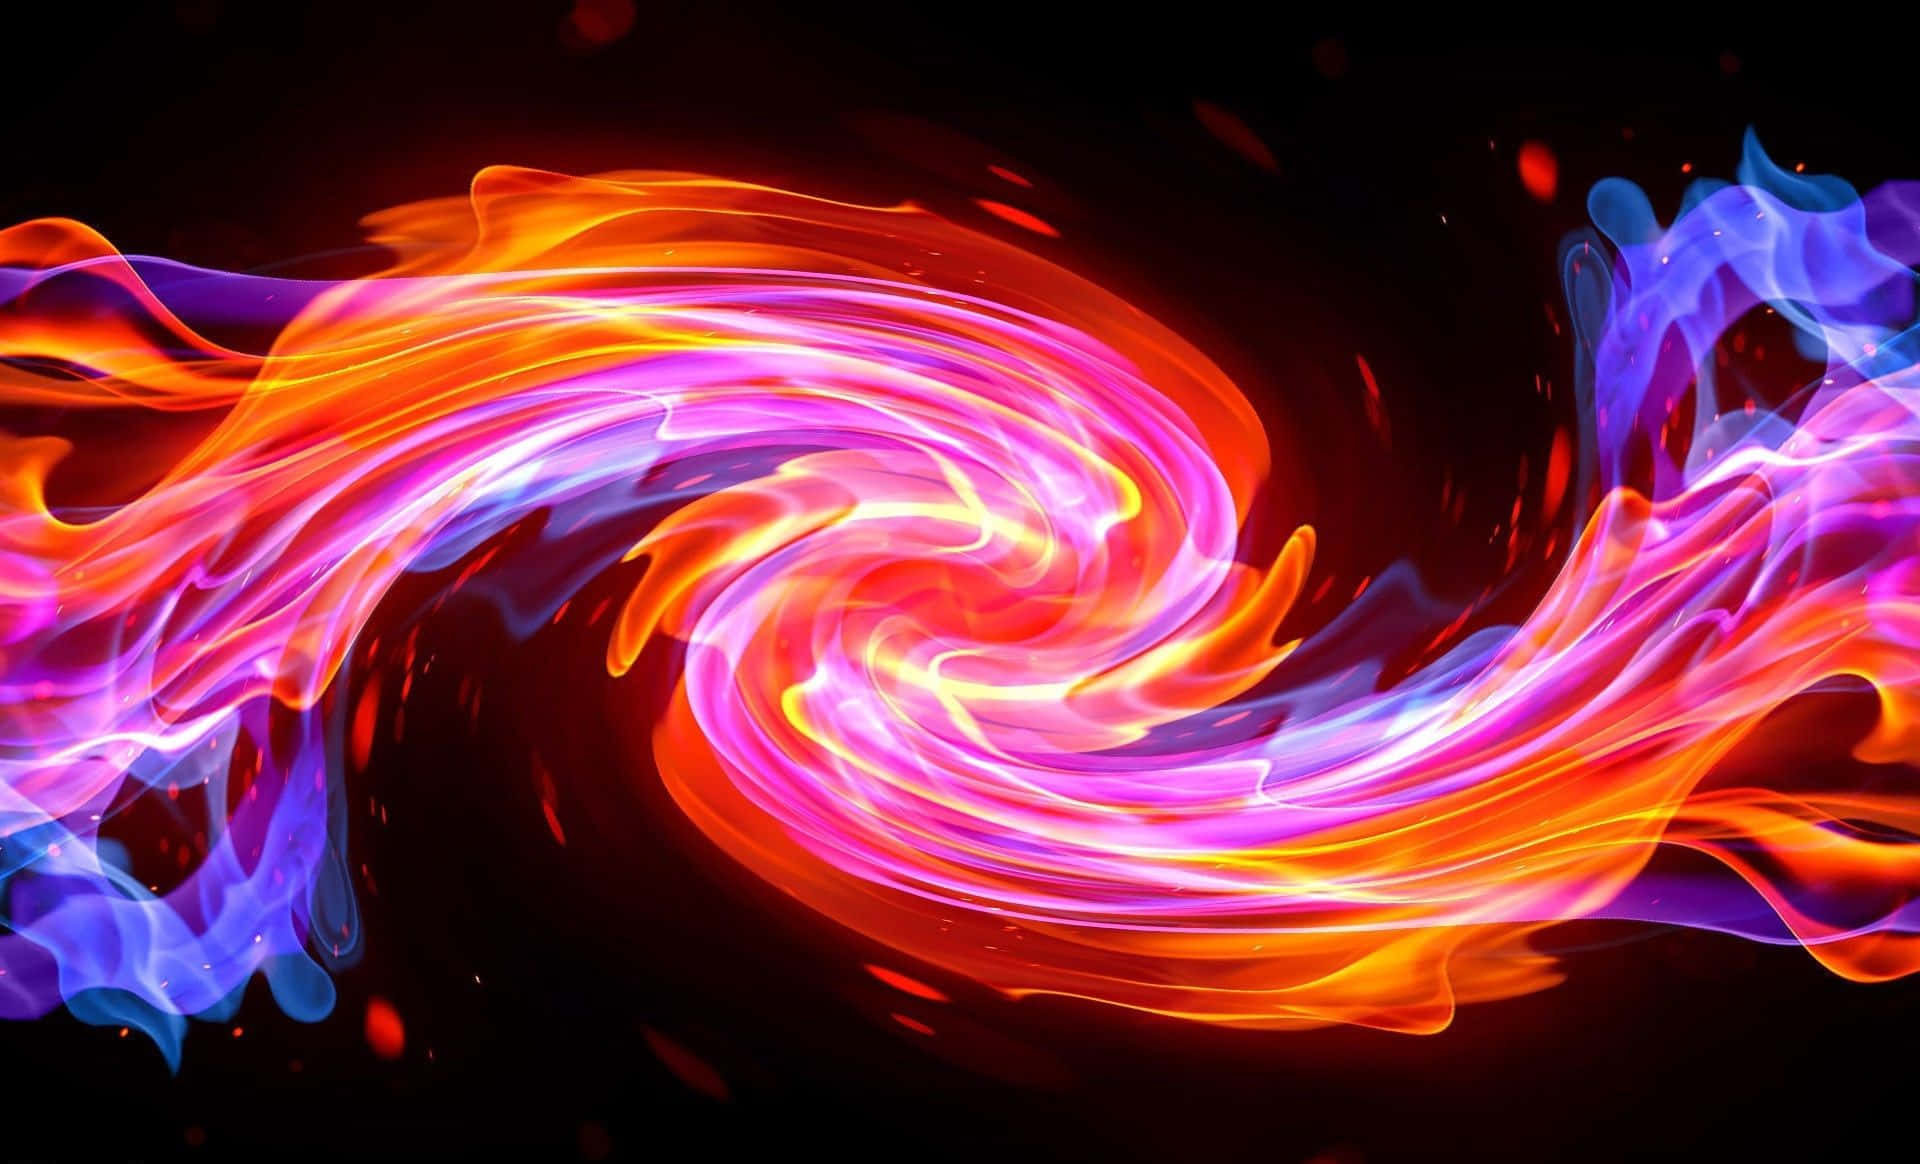 Intense Red And Blue Fire Wallpaper